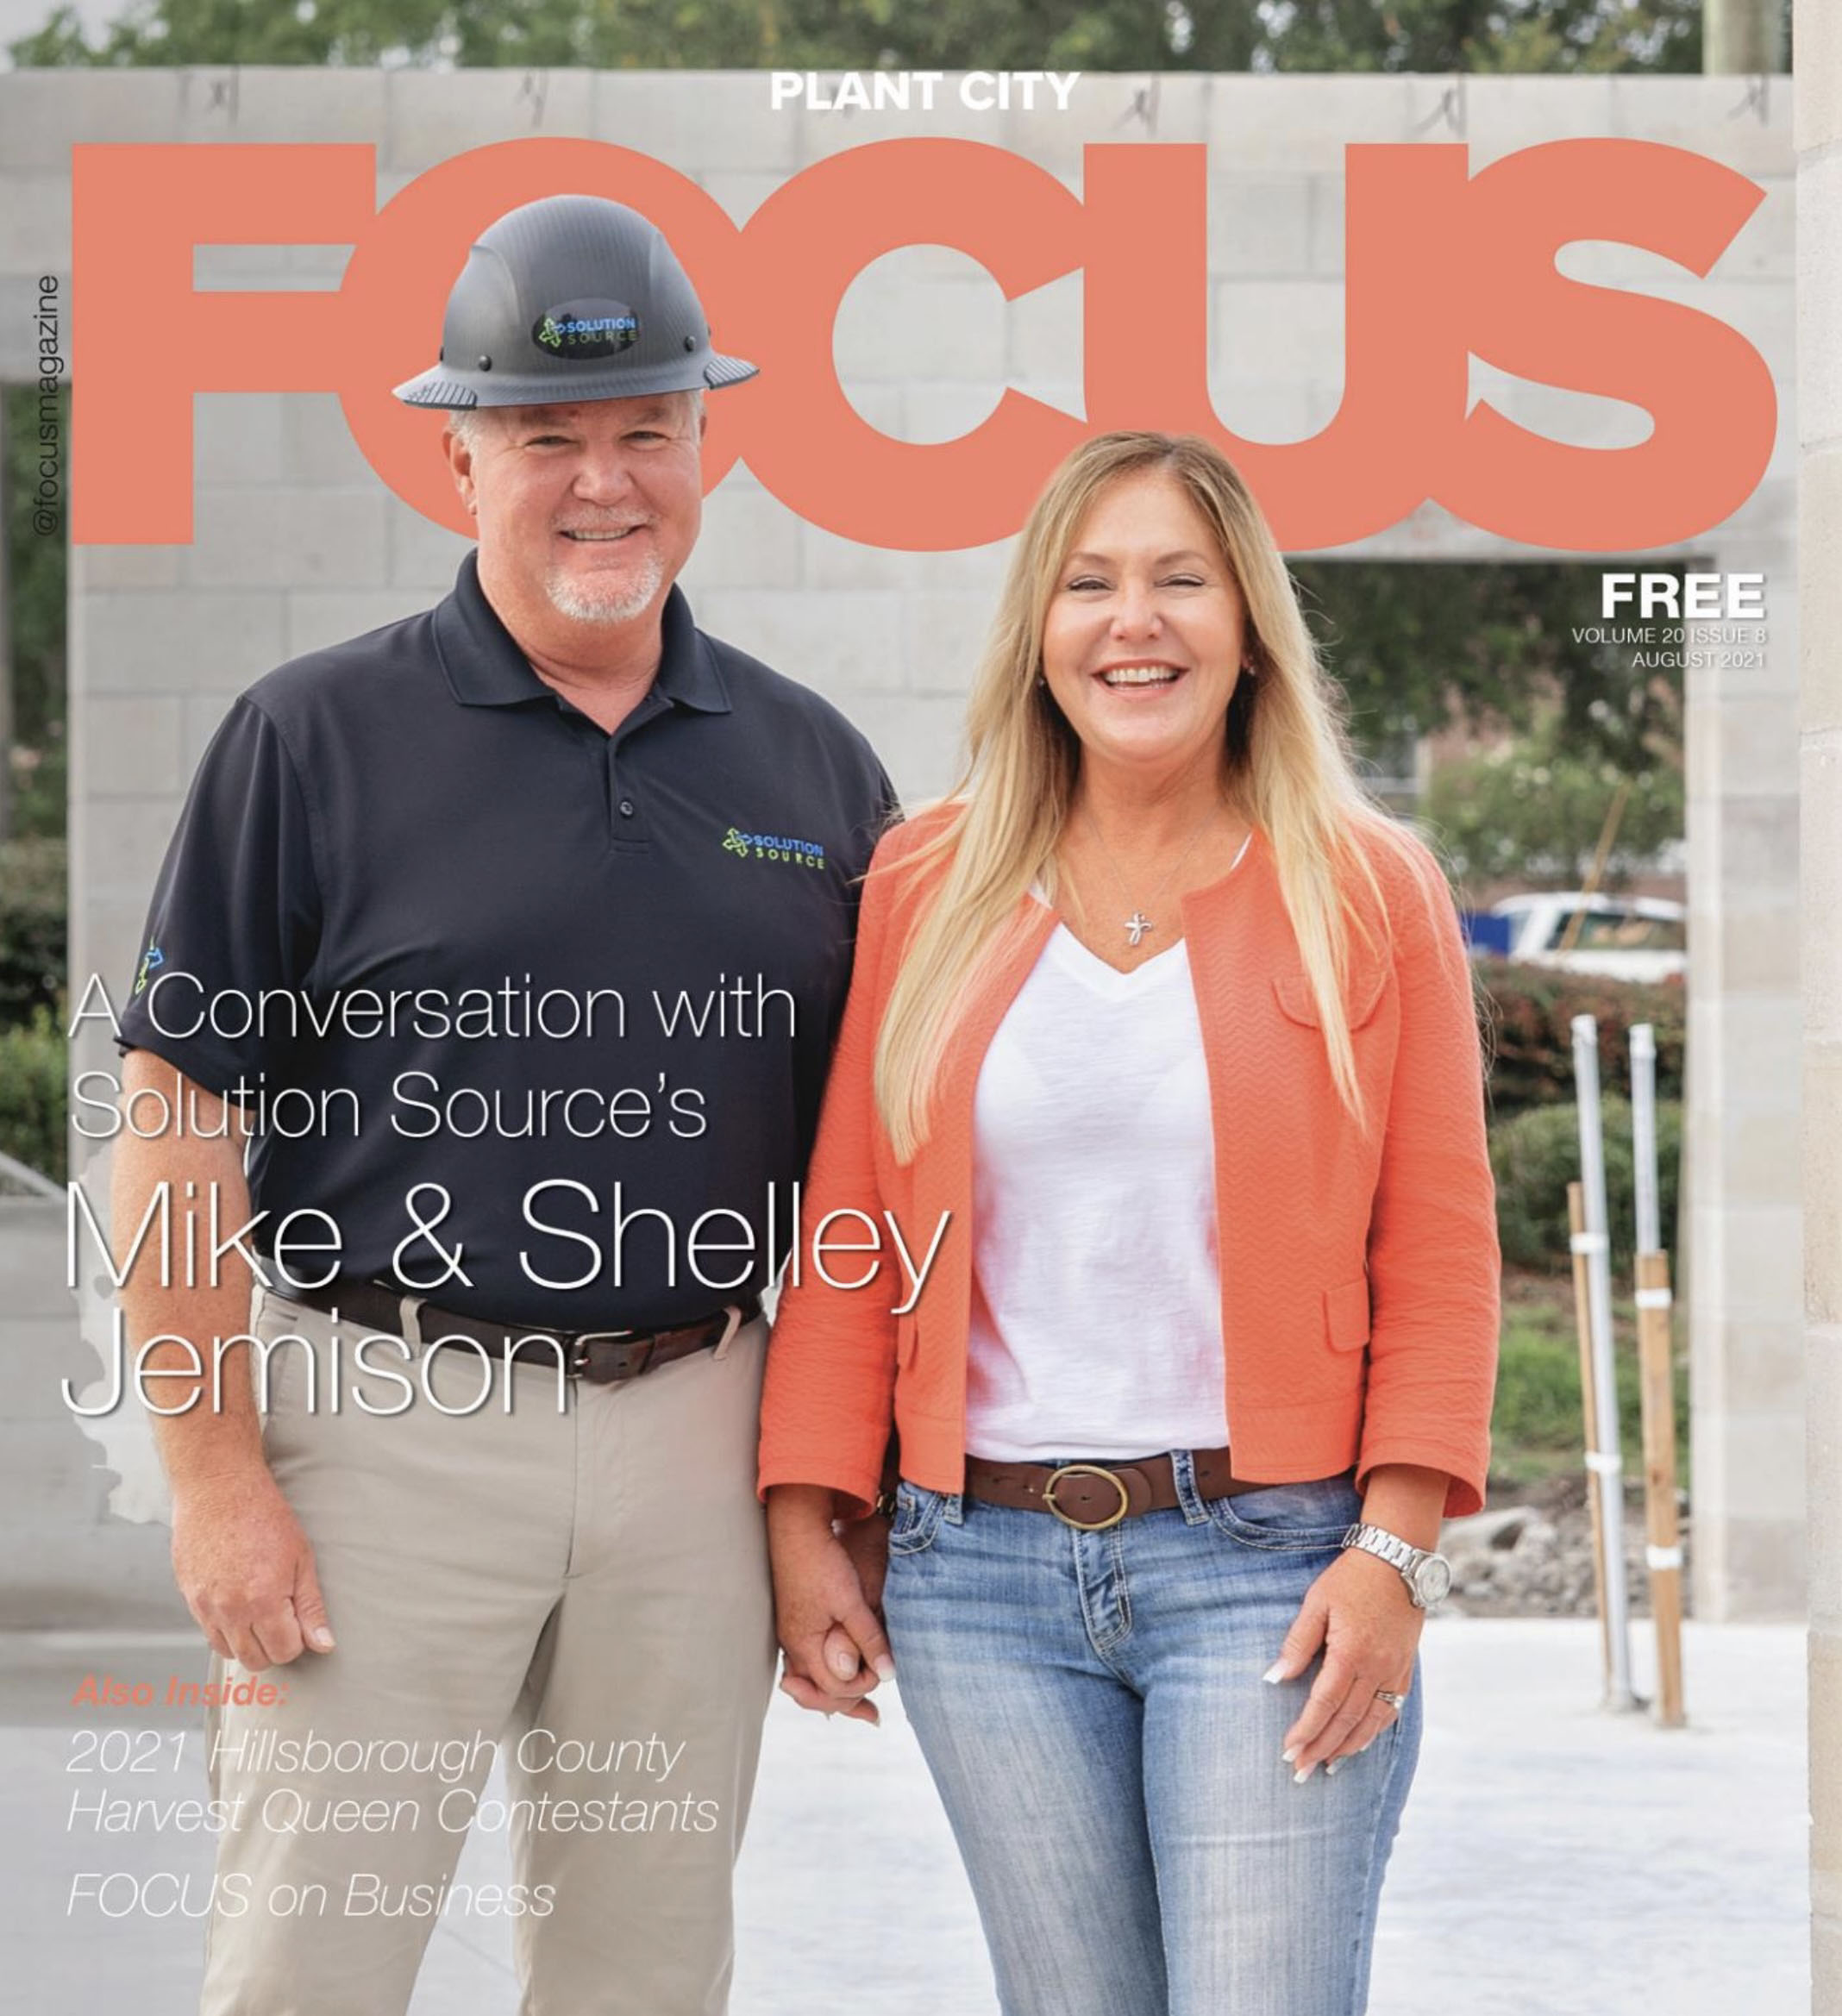 Featured image for “A Conversation with Mike & Shelly Jemison”